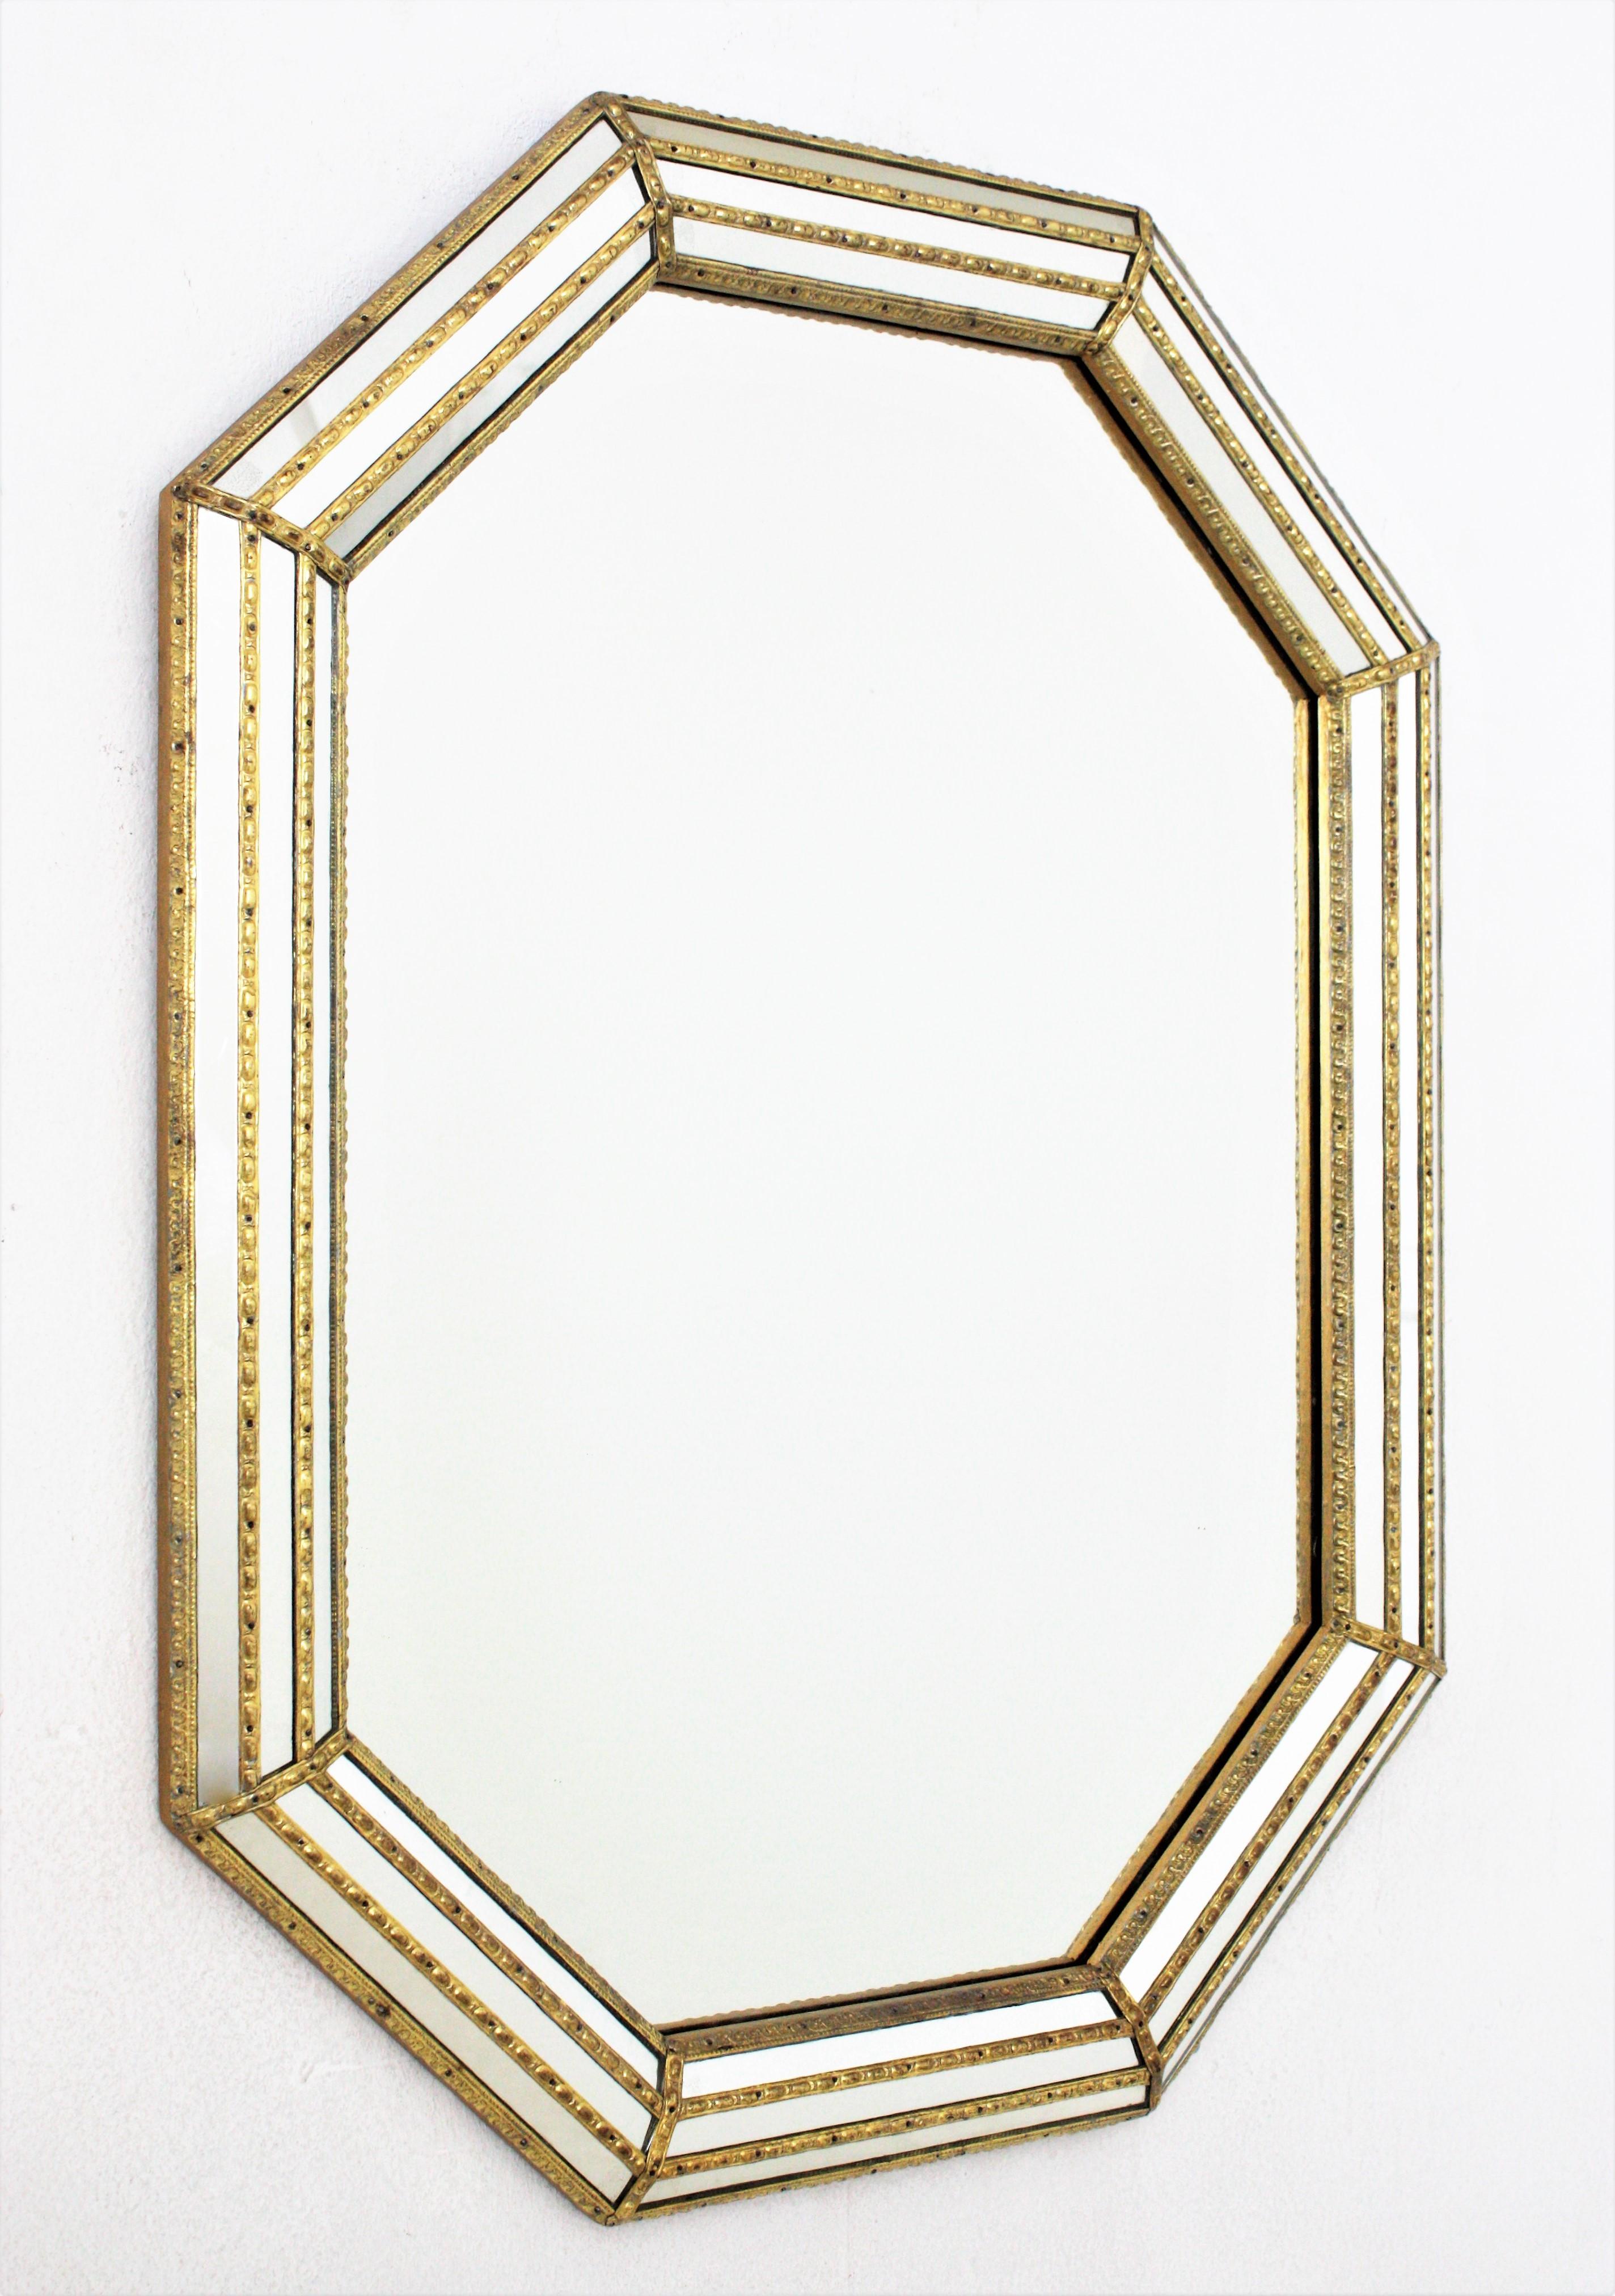 Venetian Modern Octagonal Mirror with Mirror and Brass Frame
Venetian style octagonal wall mirror with gilt metal accents, Spain, 1950s
This octagonal mirror has a triple mirror frame. The mirrored panels are adorned by metal patterns.
This wall